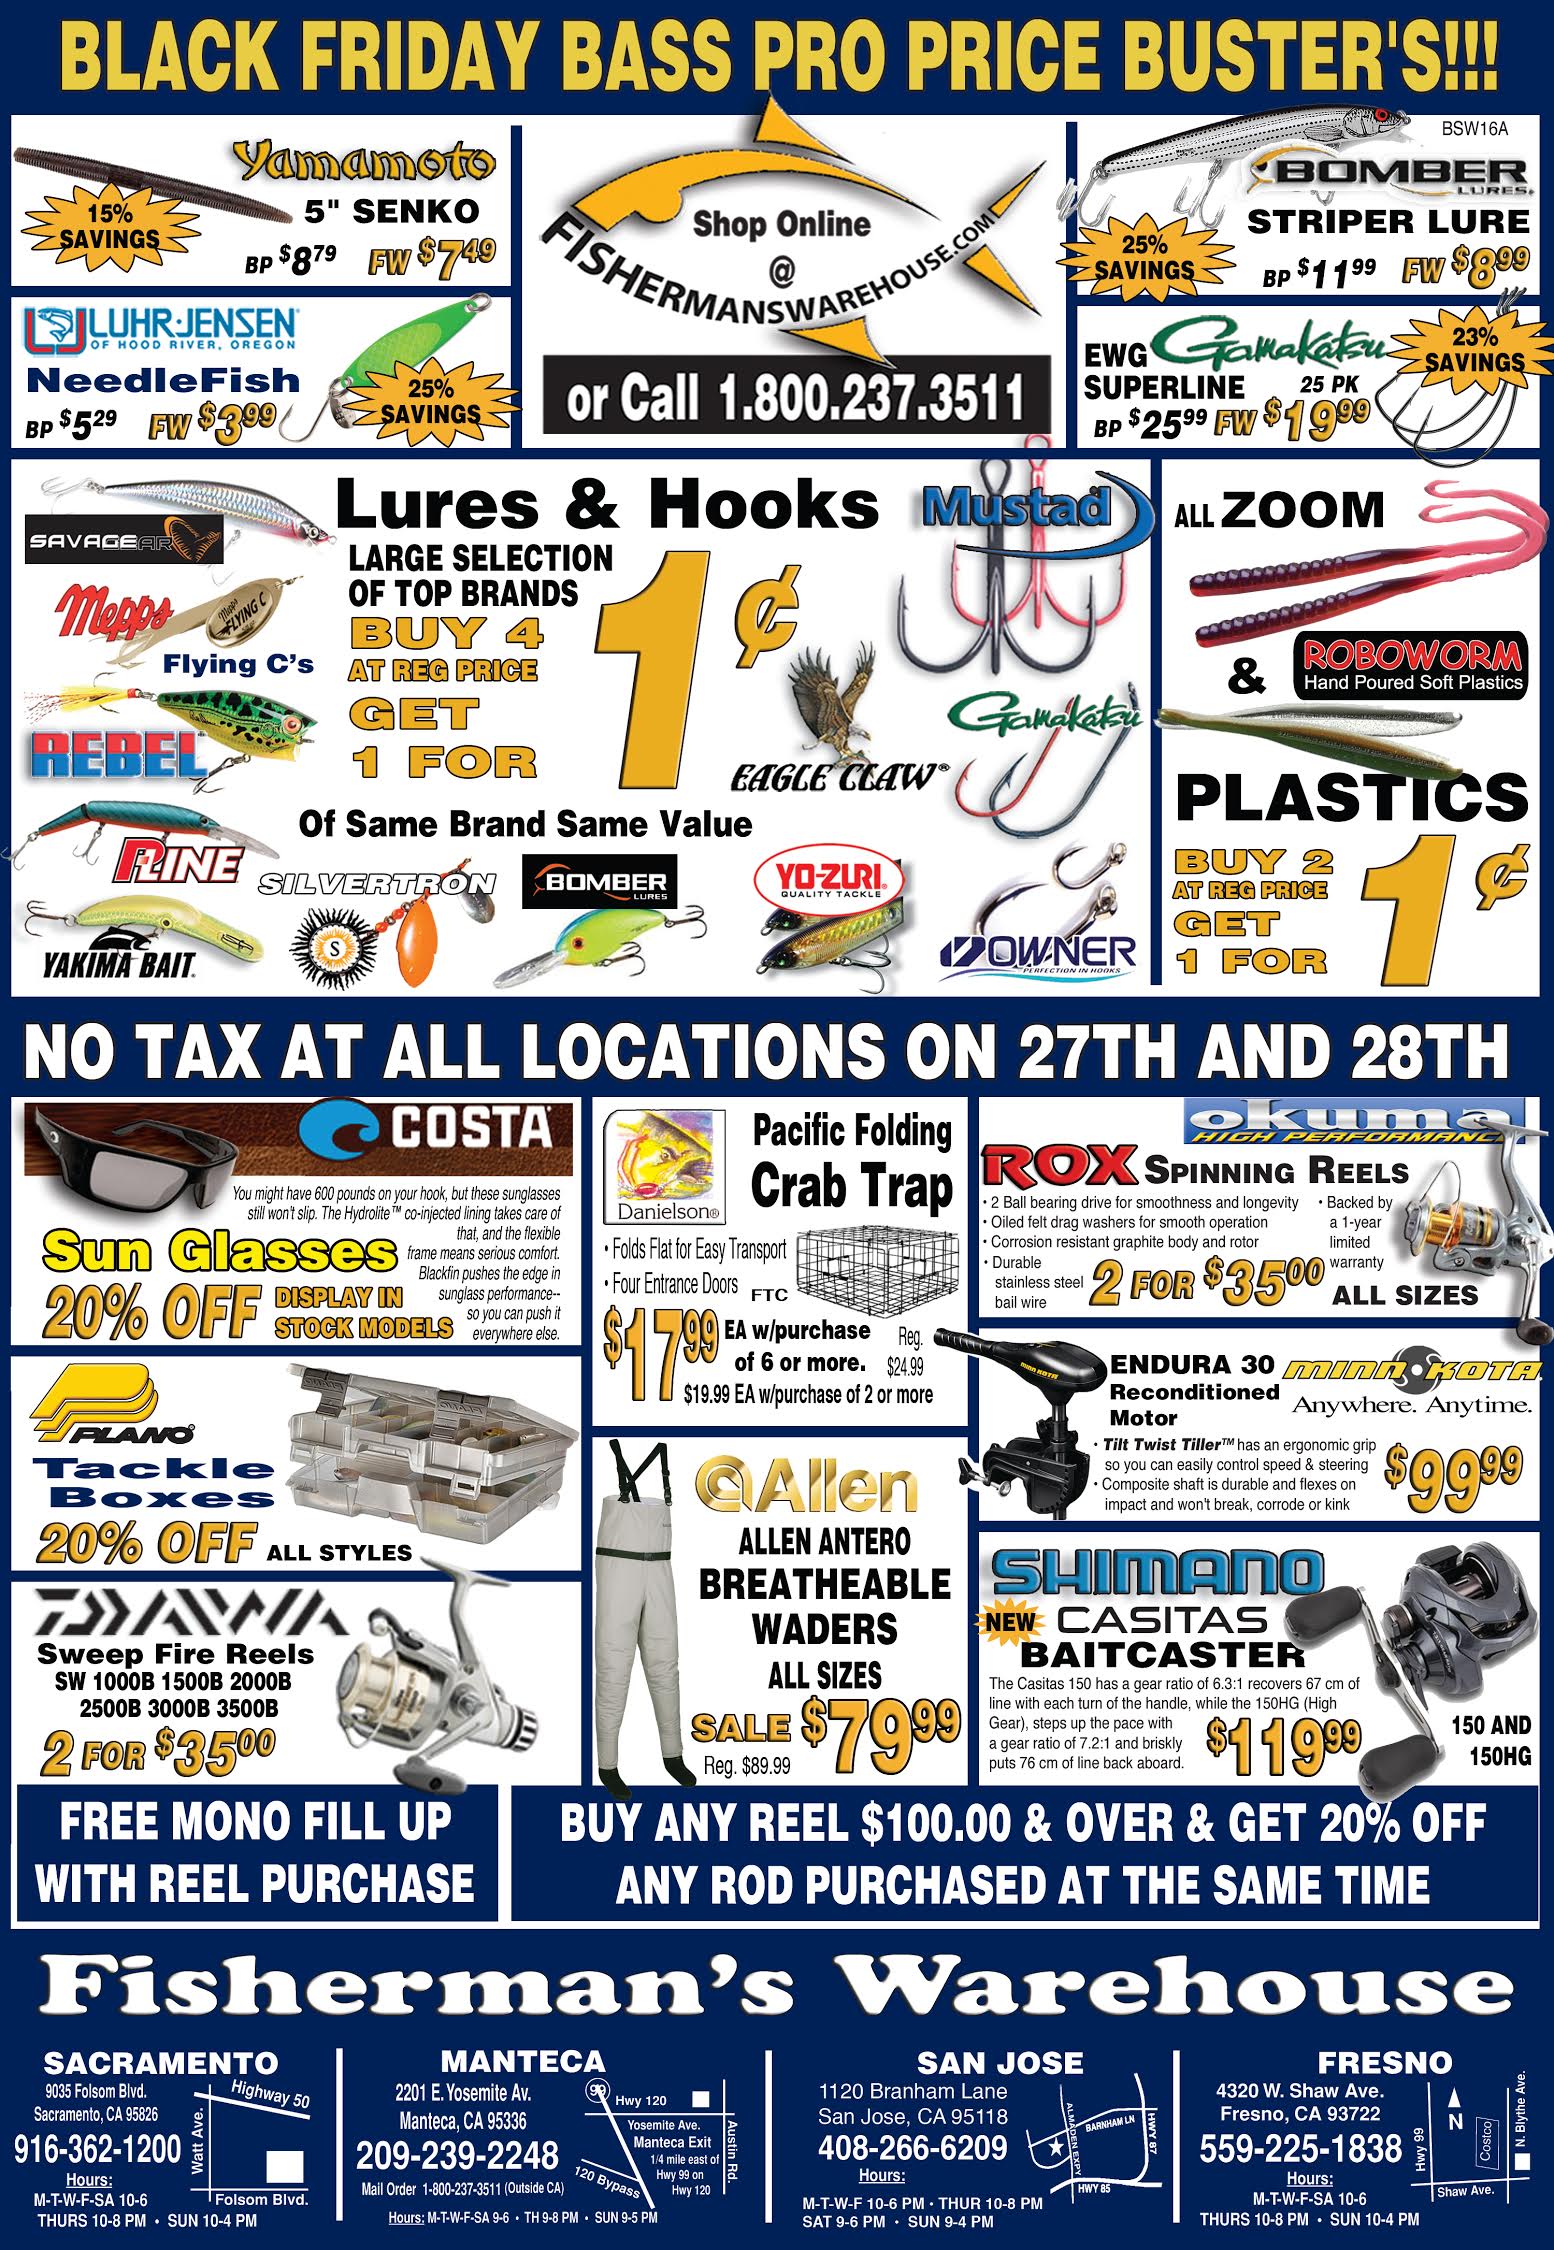 Sneak Peek at Black Friday Specials for Fisherman's Warehouse